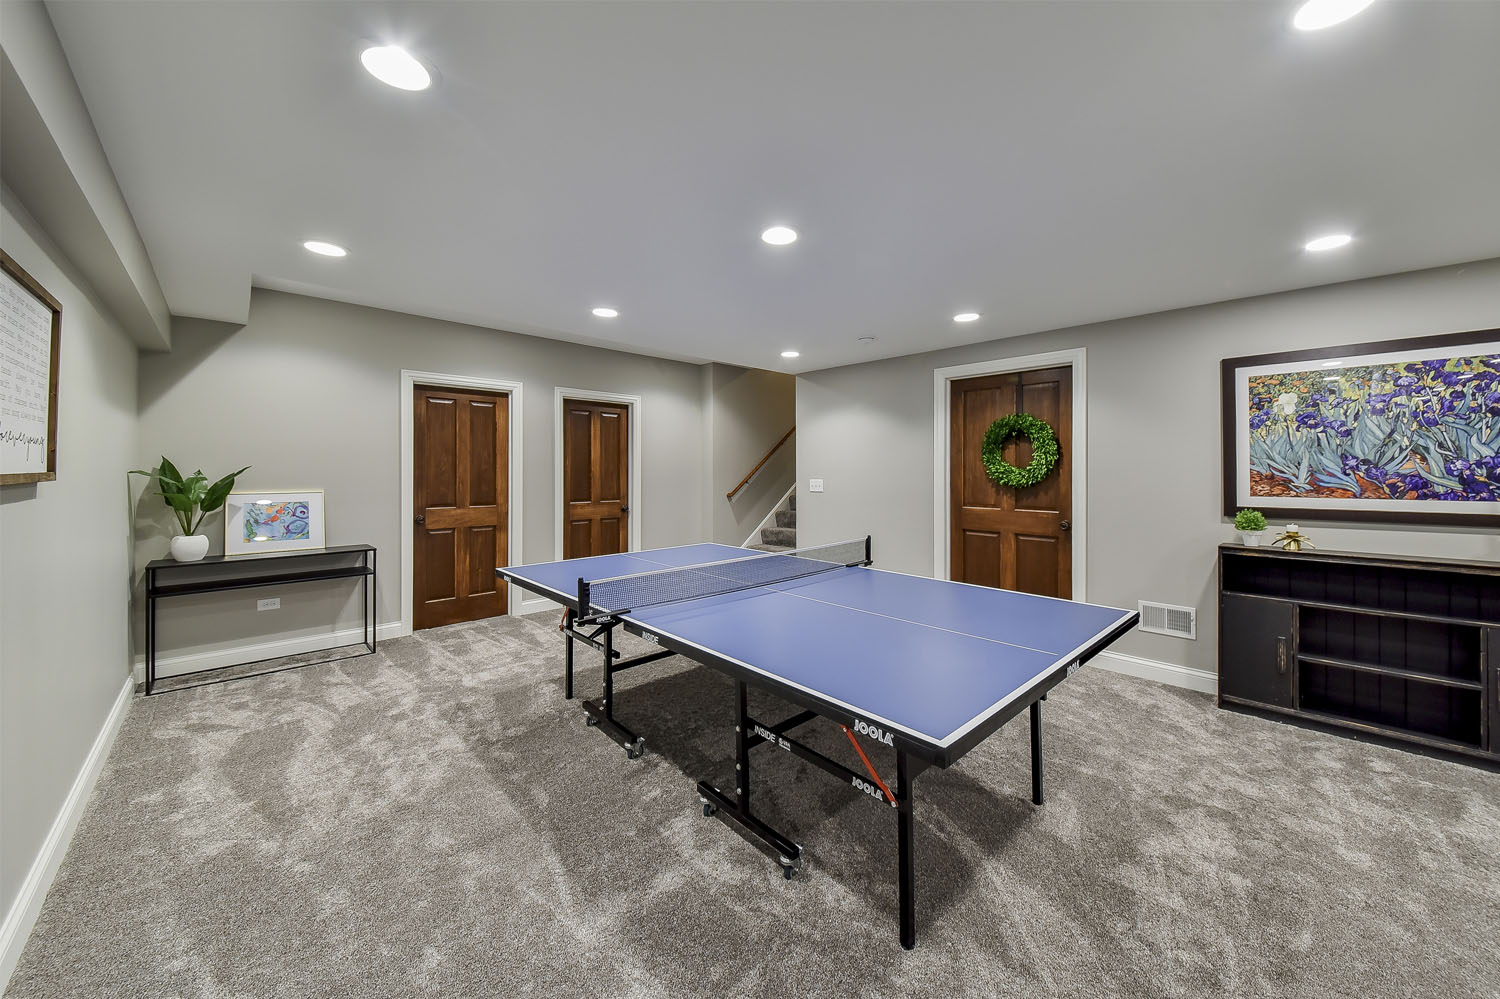 Basement Remodel Pictures